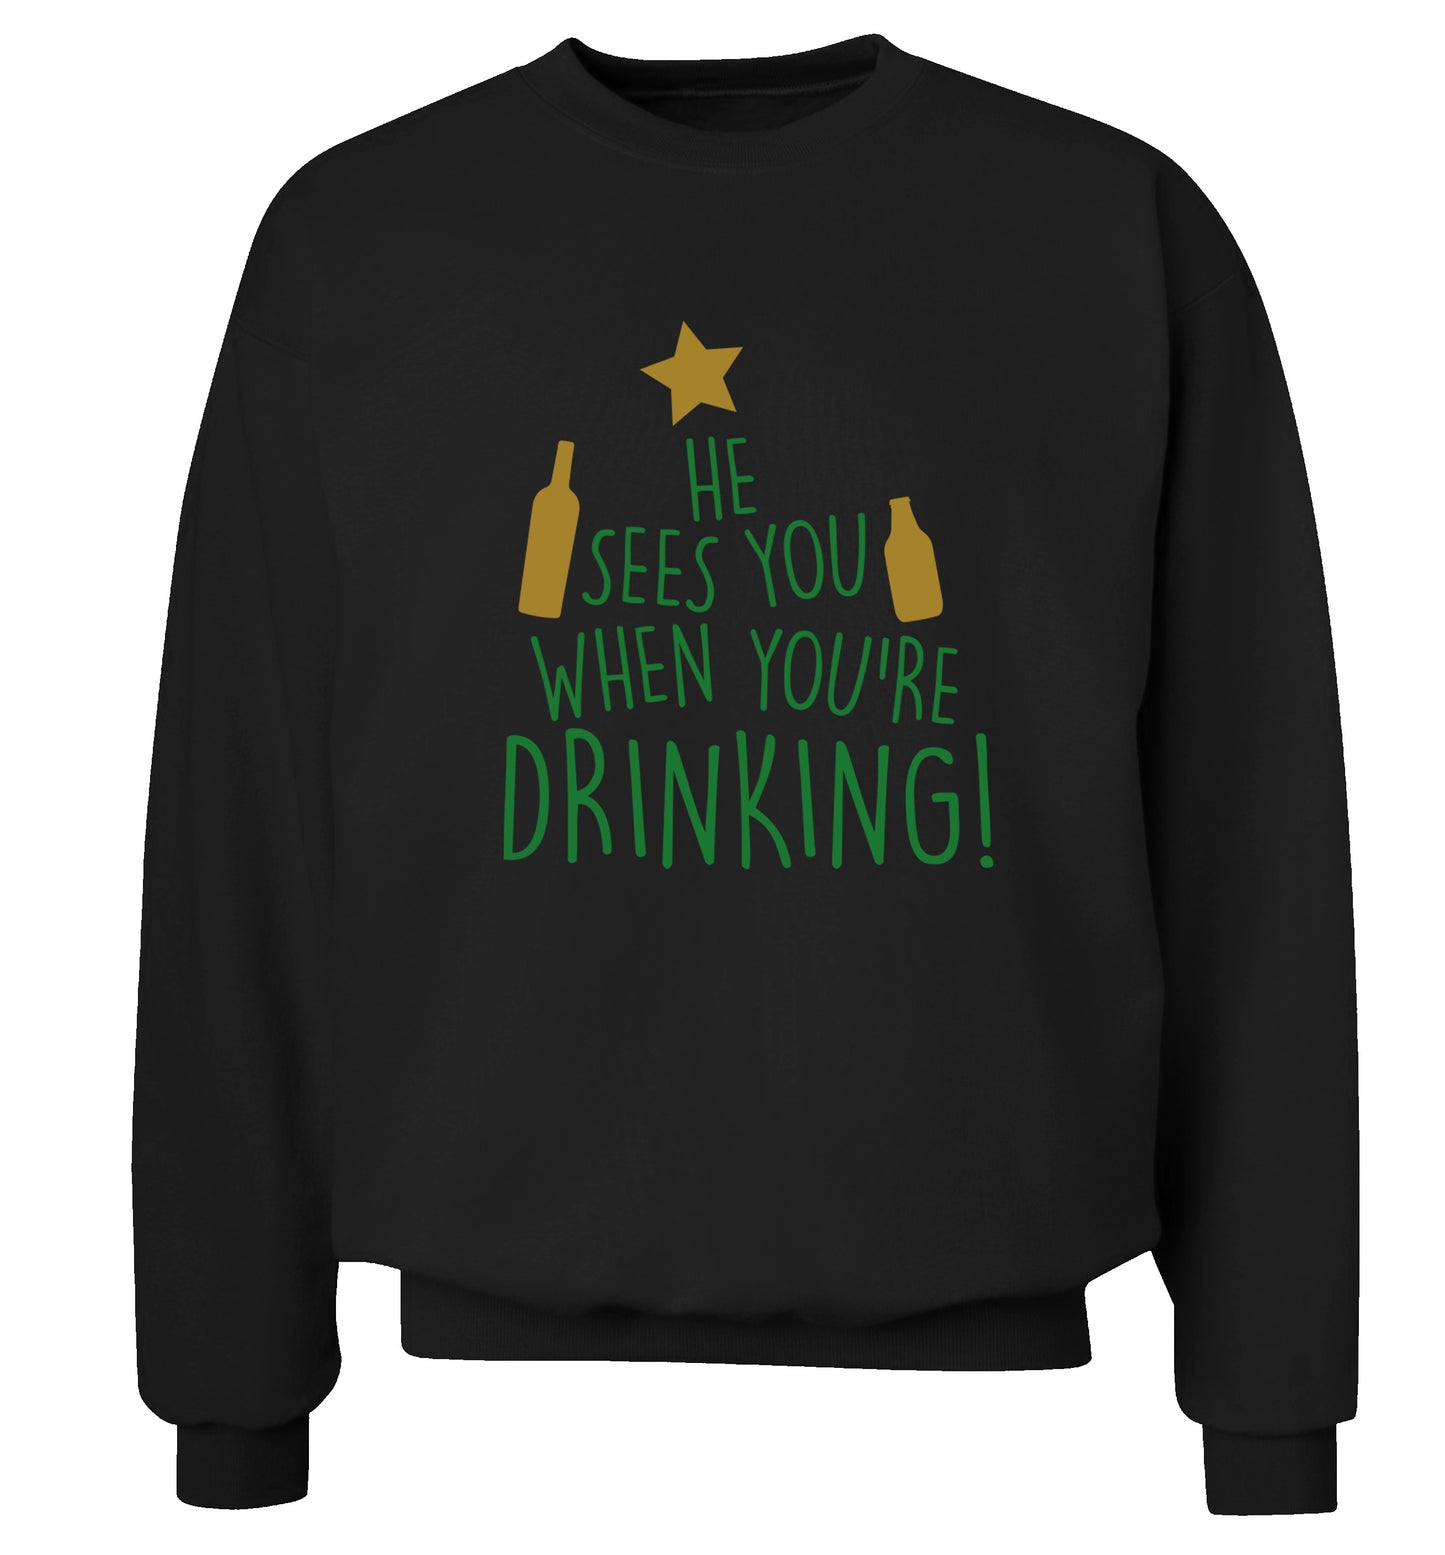 He sees you when you're drinking Adult's unisex black Sweater 2XL